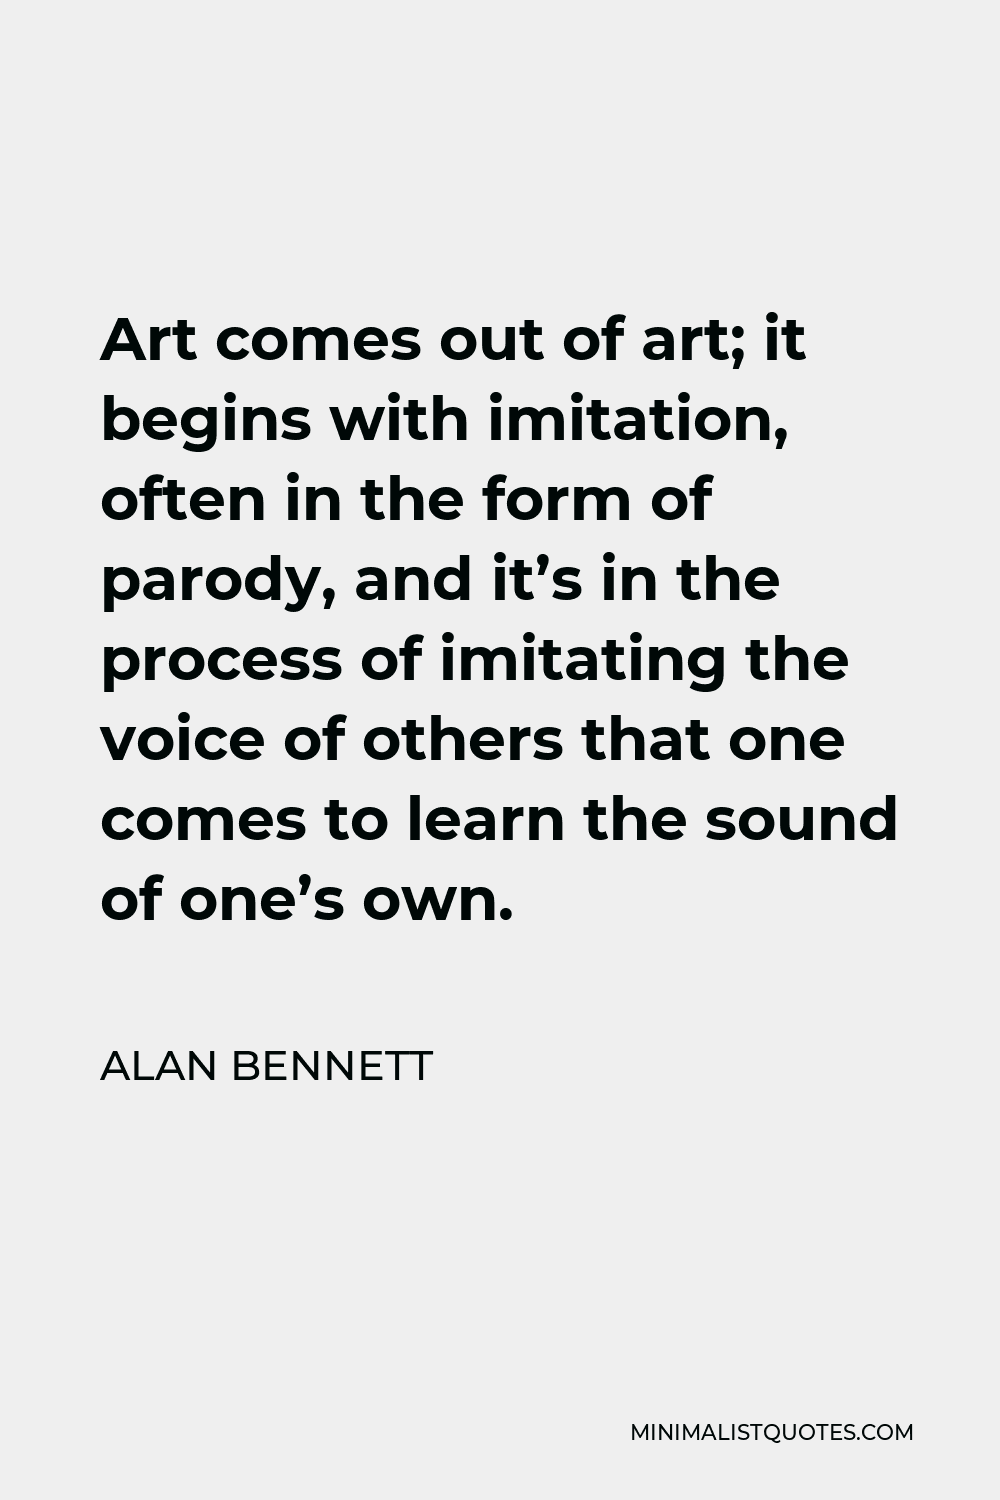 Alan Bennett Quote - Art comes out of art; it begins with imitation, often in the form of parody, and it’s in the process of imitating the voice of others that one comes to learn the sound of one’s own.